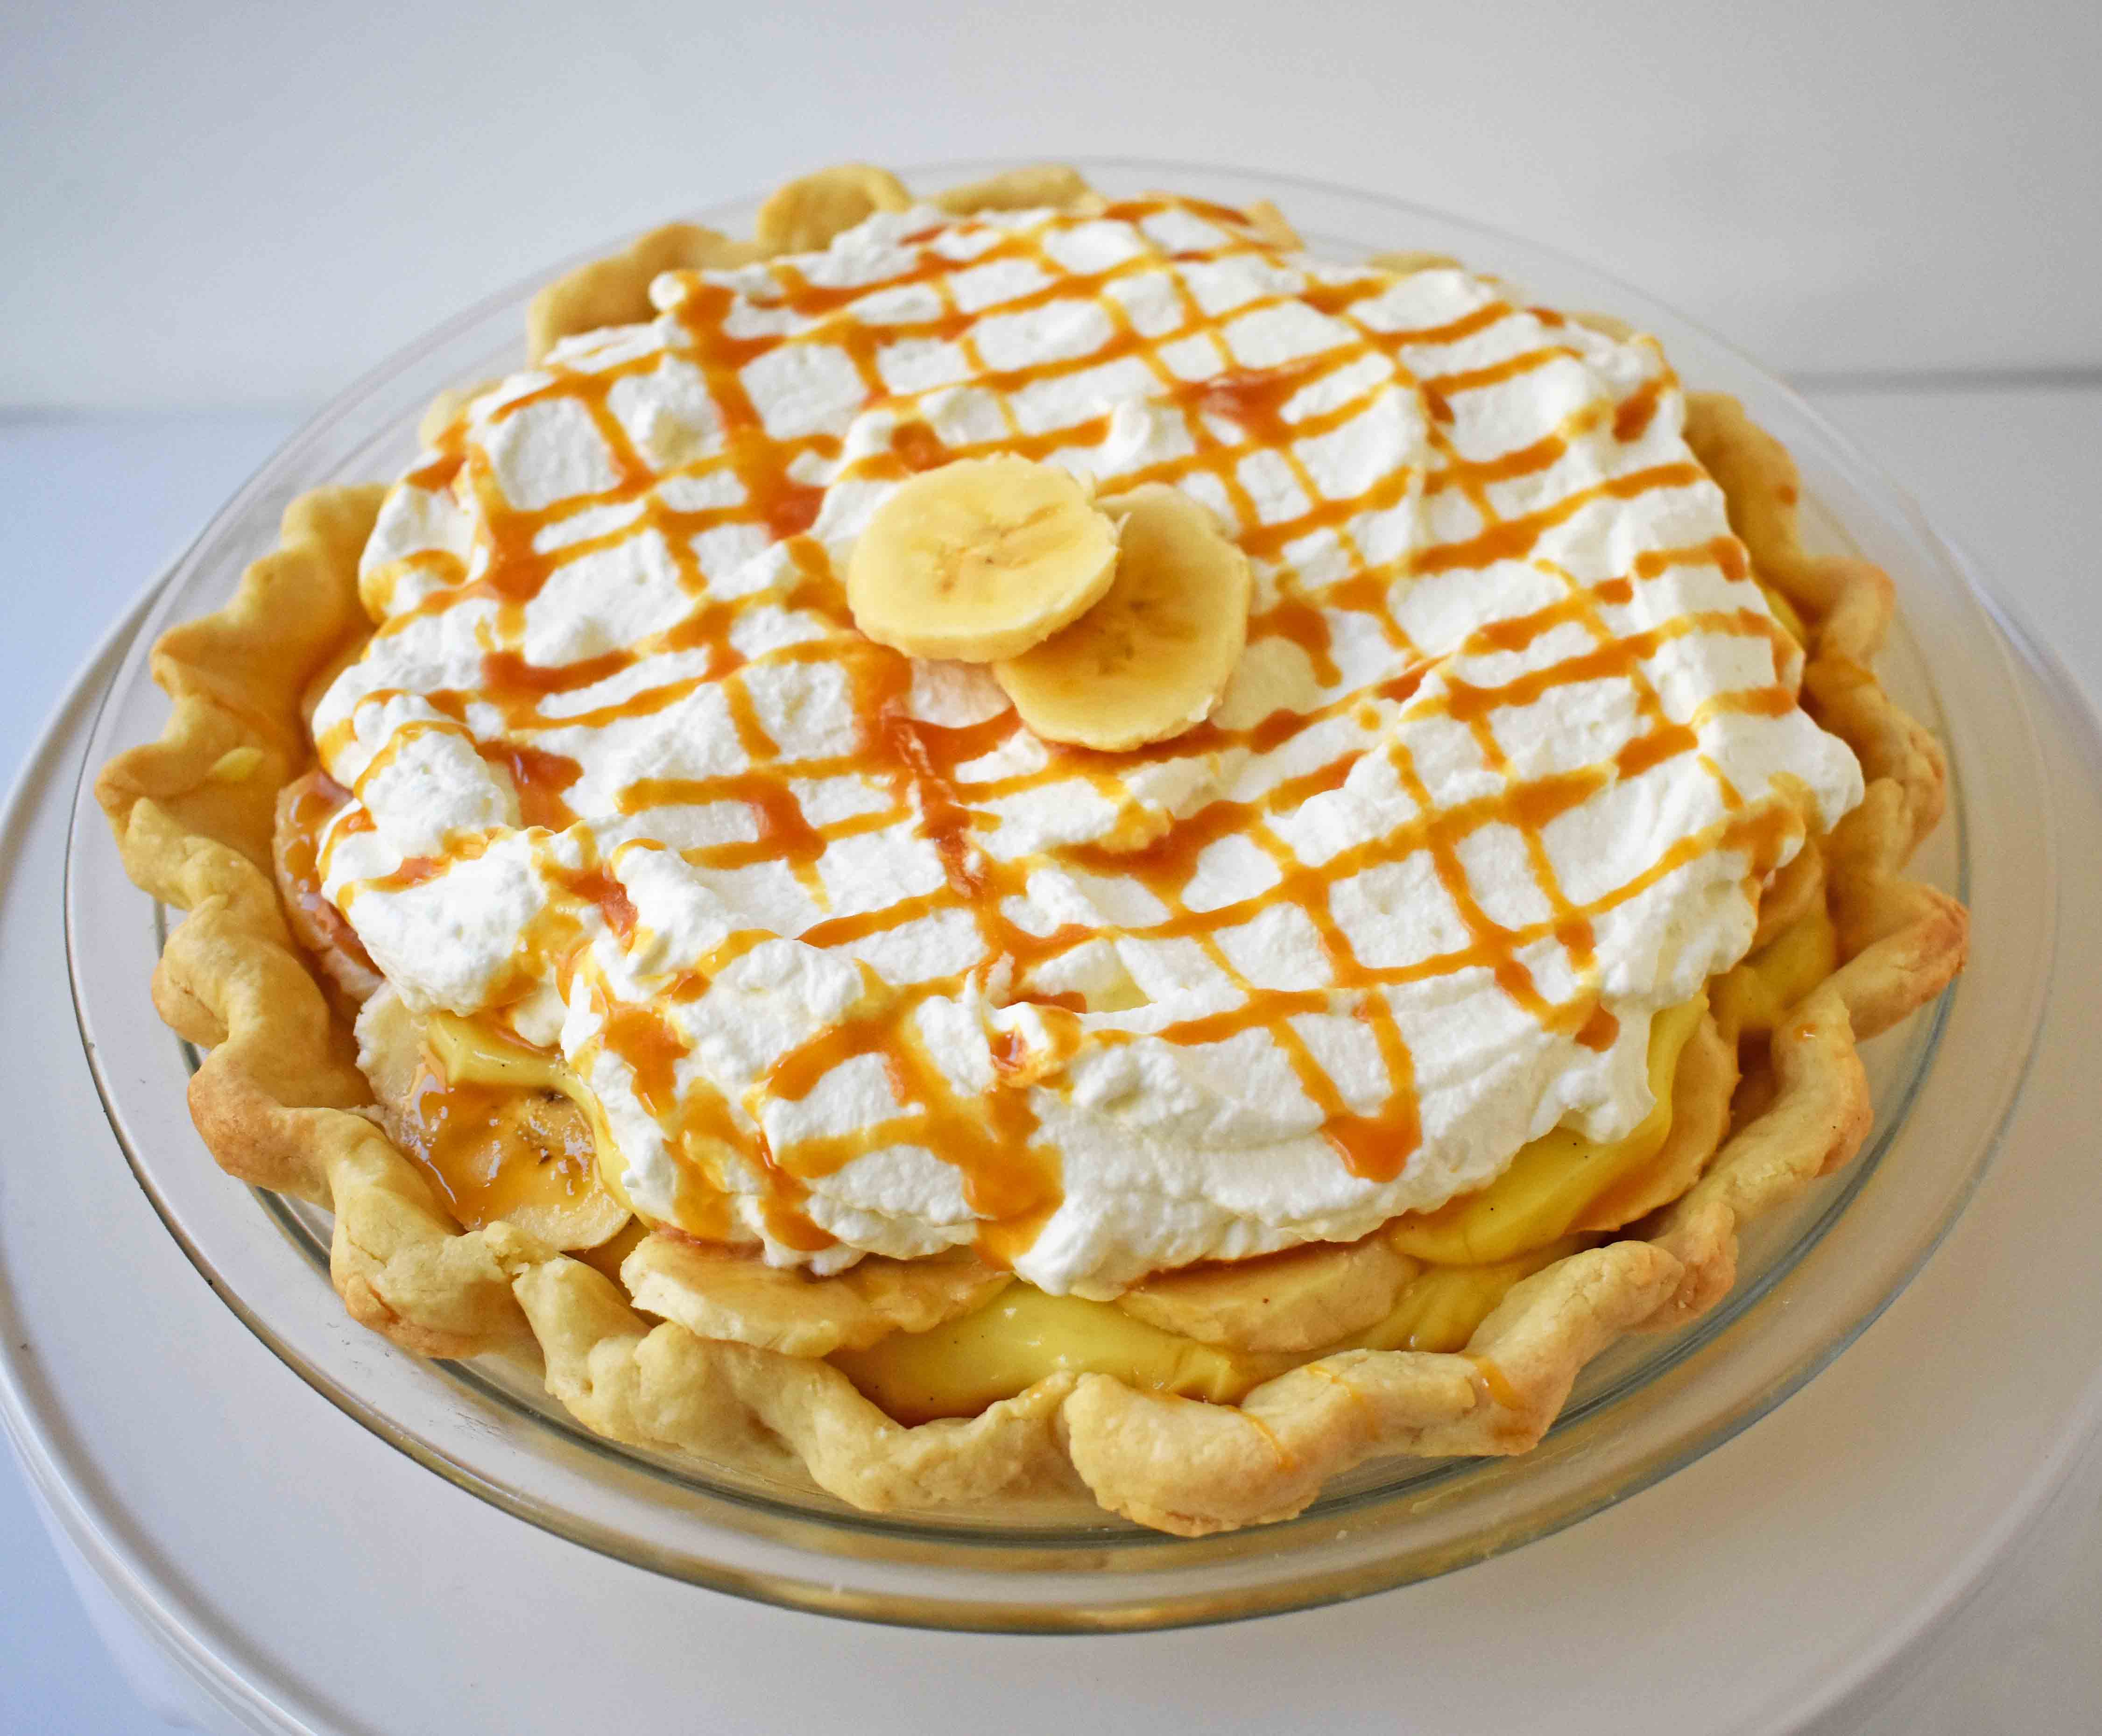 Salted Caramel Banana Cream Pie. Sweet Homemade Custard topped with fresh bananas, handcrafted salted caramel, and sweetened whipped cream all on a flaky, buttery crust.